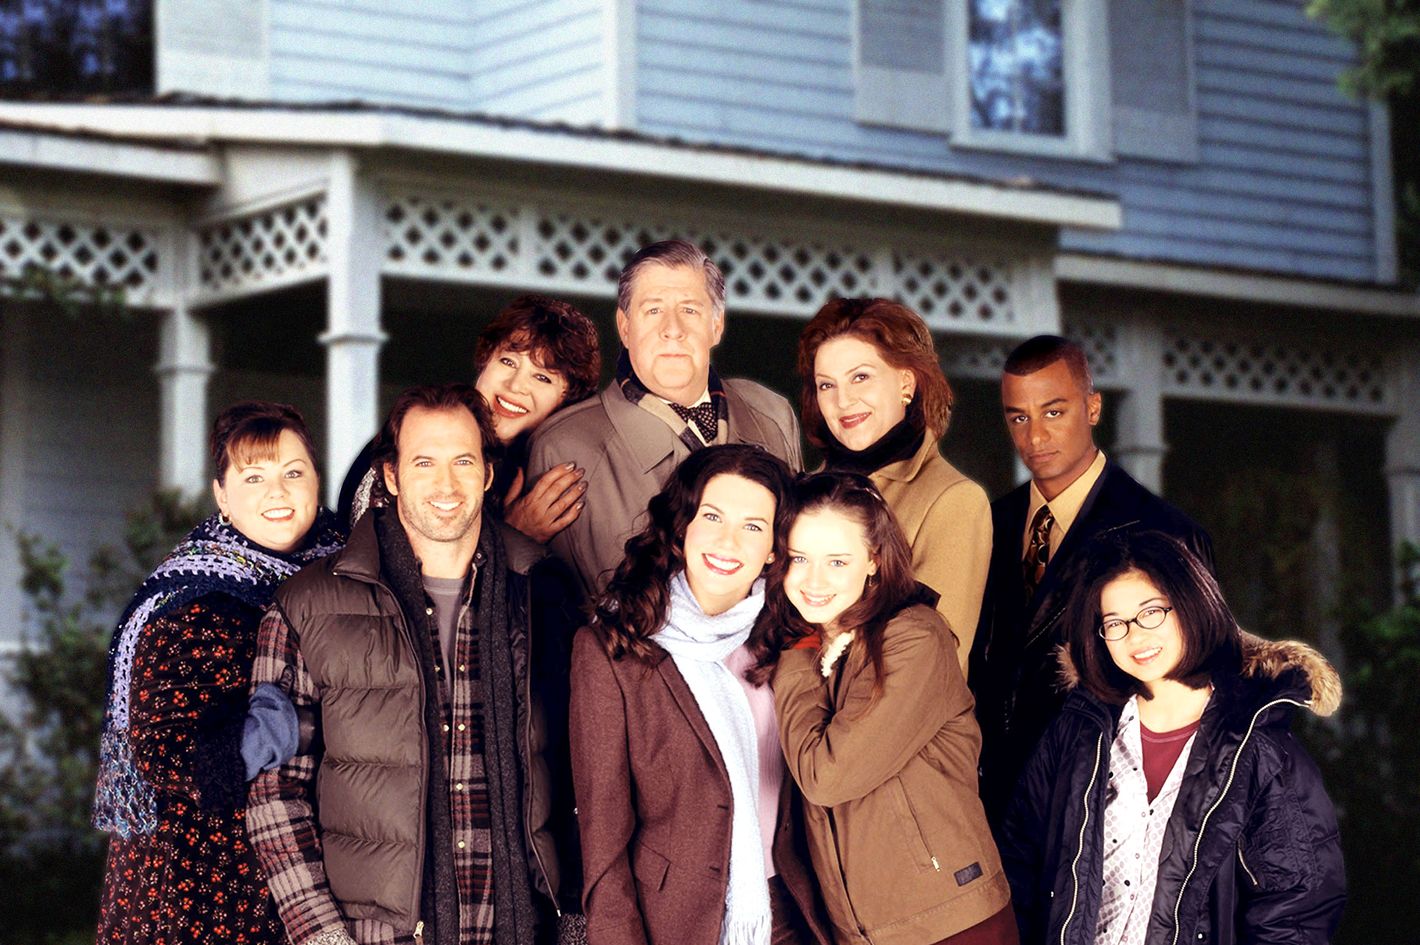 PHOTOS] 'Gilmore Girls': The Best Characters, Ranked – TVLine